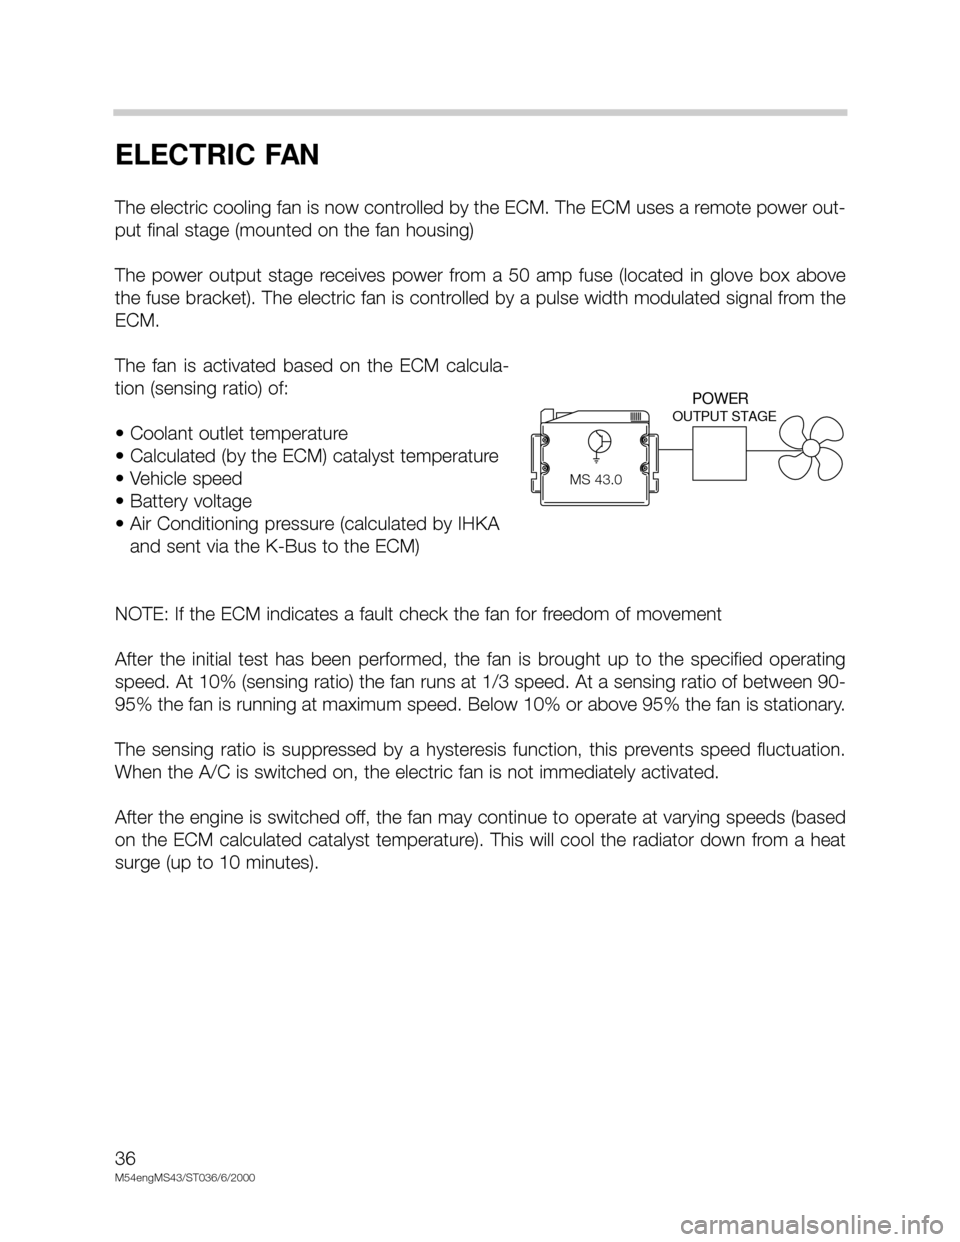 BMW X5 2004 E53 M54 Engine Workshop Manual 36
M54engMS43/ST036/6/2000
ELECTRIC FAN
The electric cooling fan is now controlled by the ECM. The ECM uses a remote power out-
put final stage (mounted on the fan housing)
The  power  output  stage  